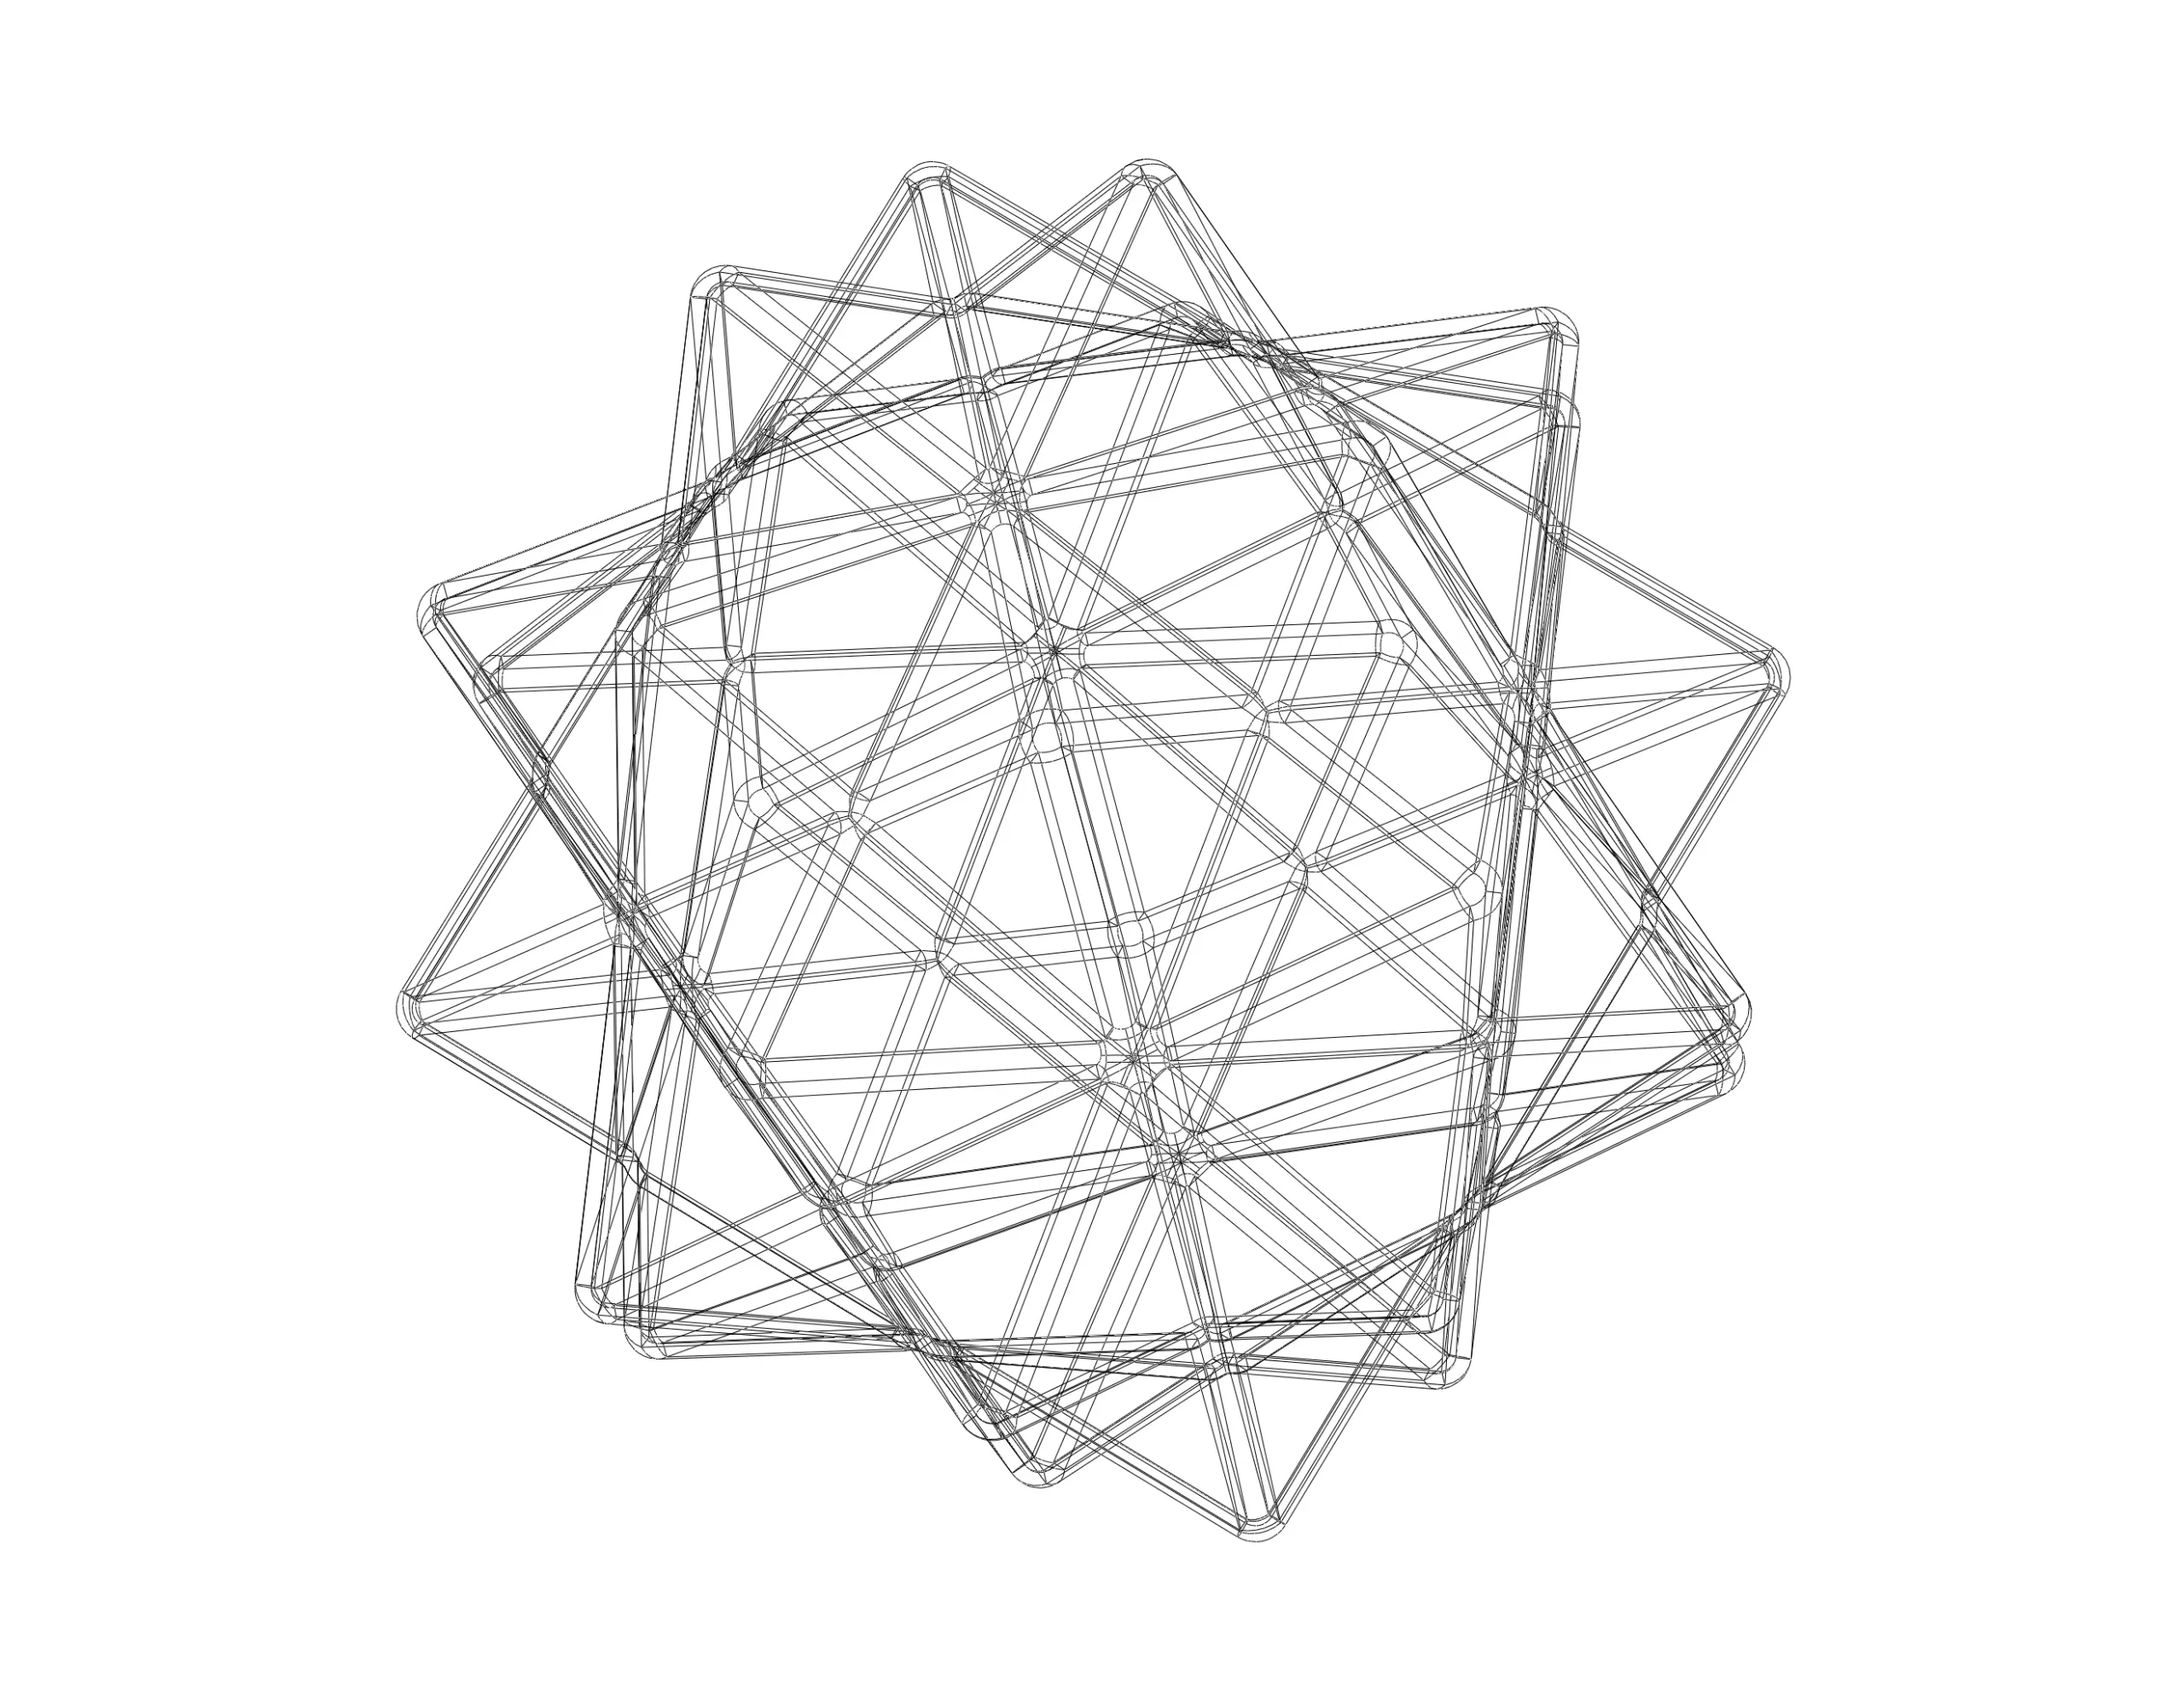 Wireframe Shape Compound of Five Octahedra